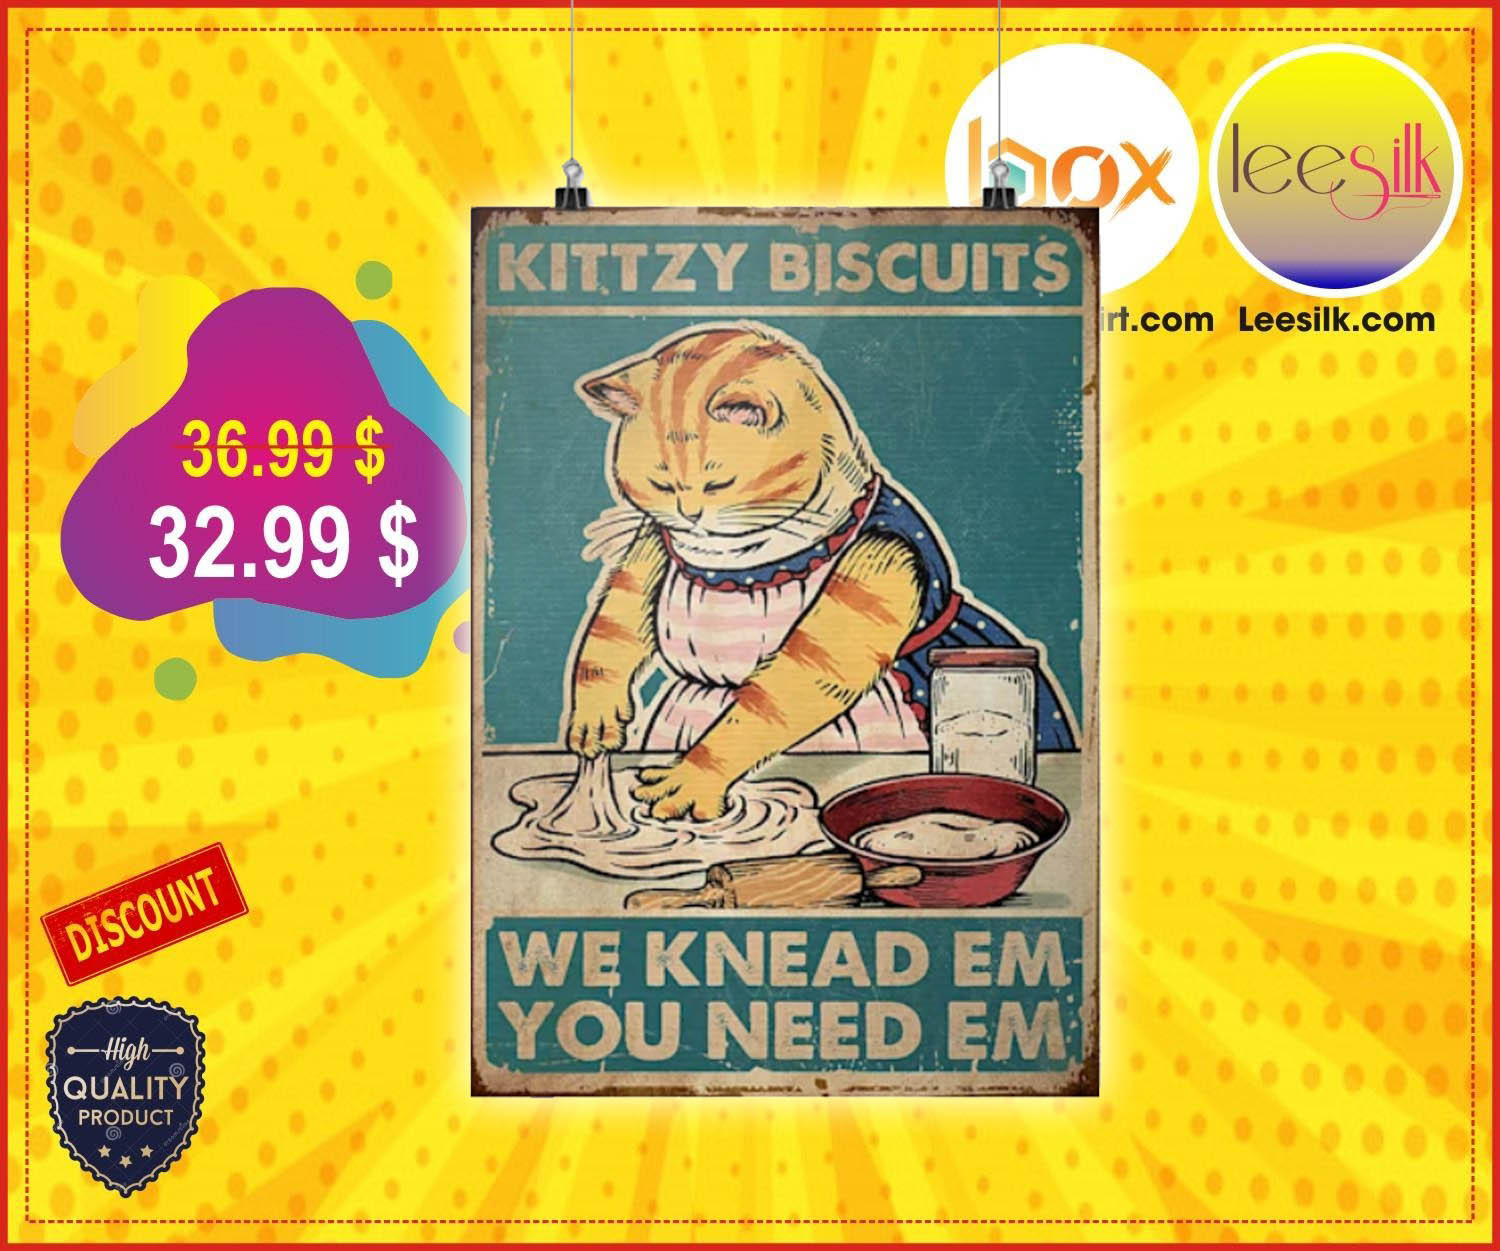 Kittzy biscuits we knead em you need em poster 3